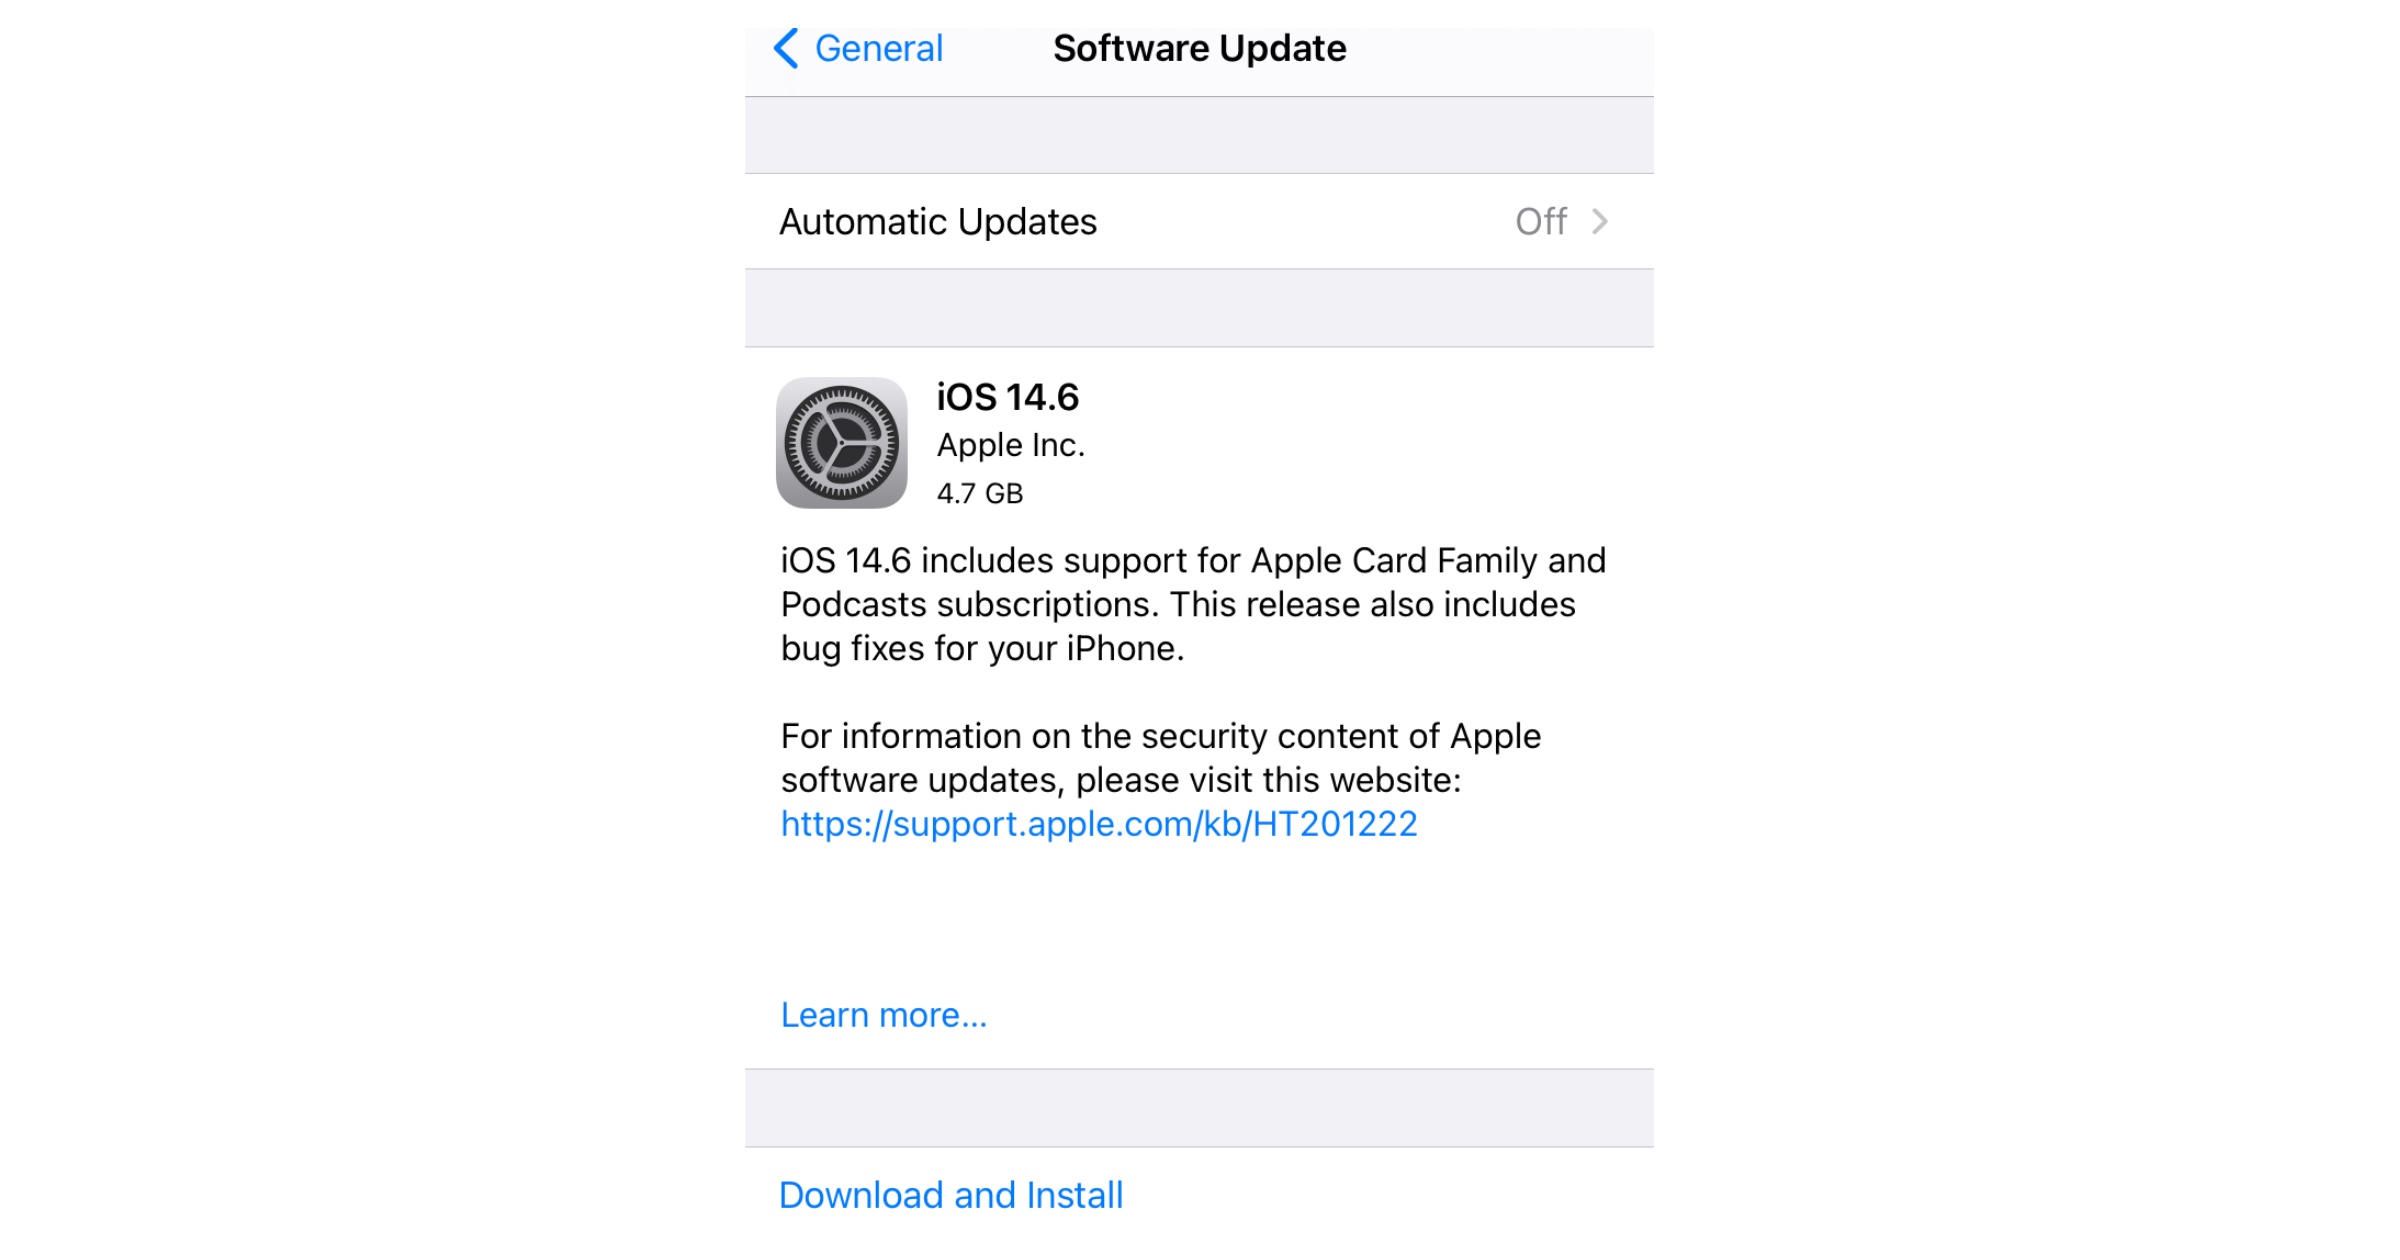 iOS 14.6 release candidate